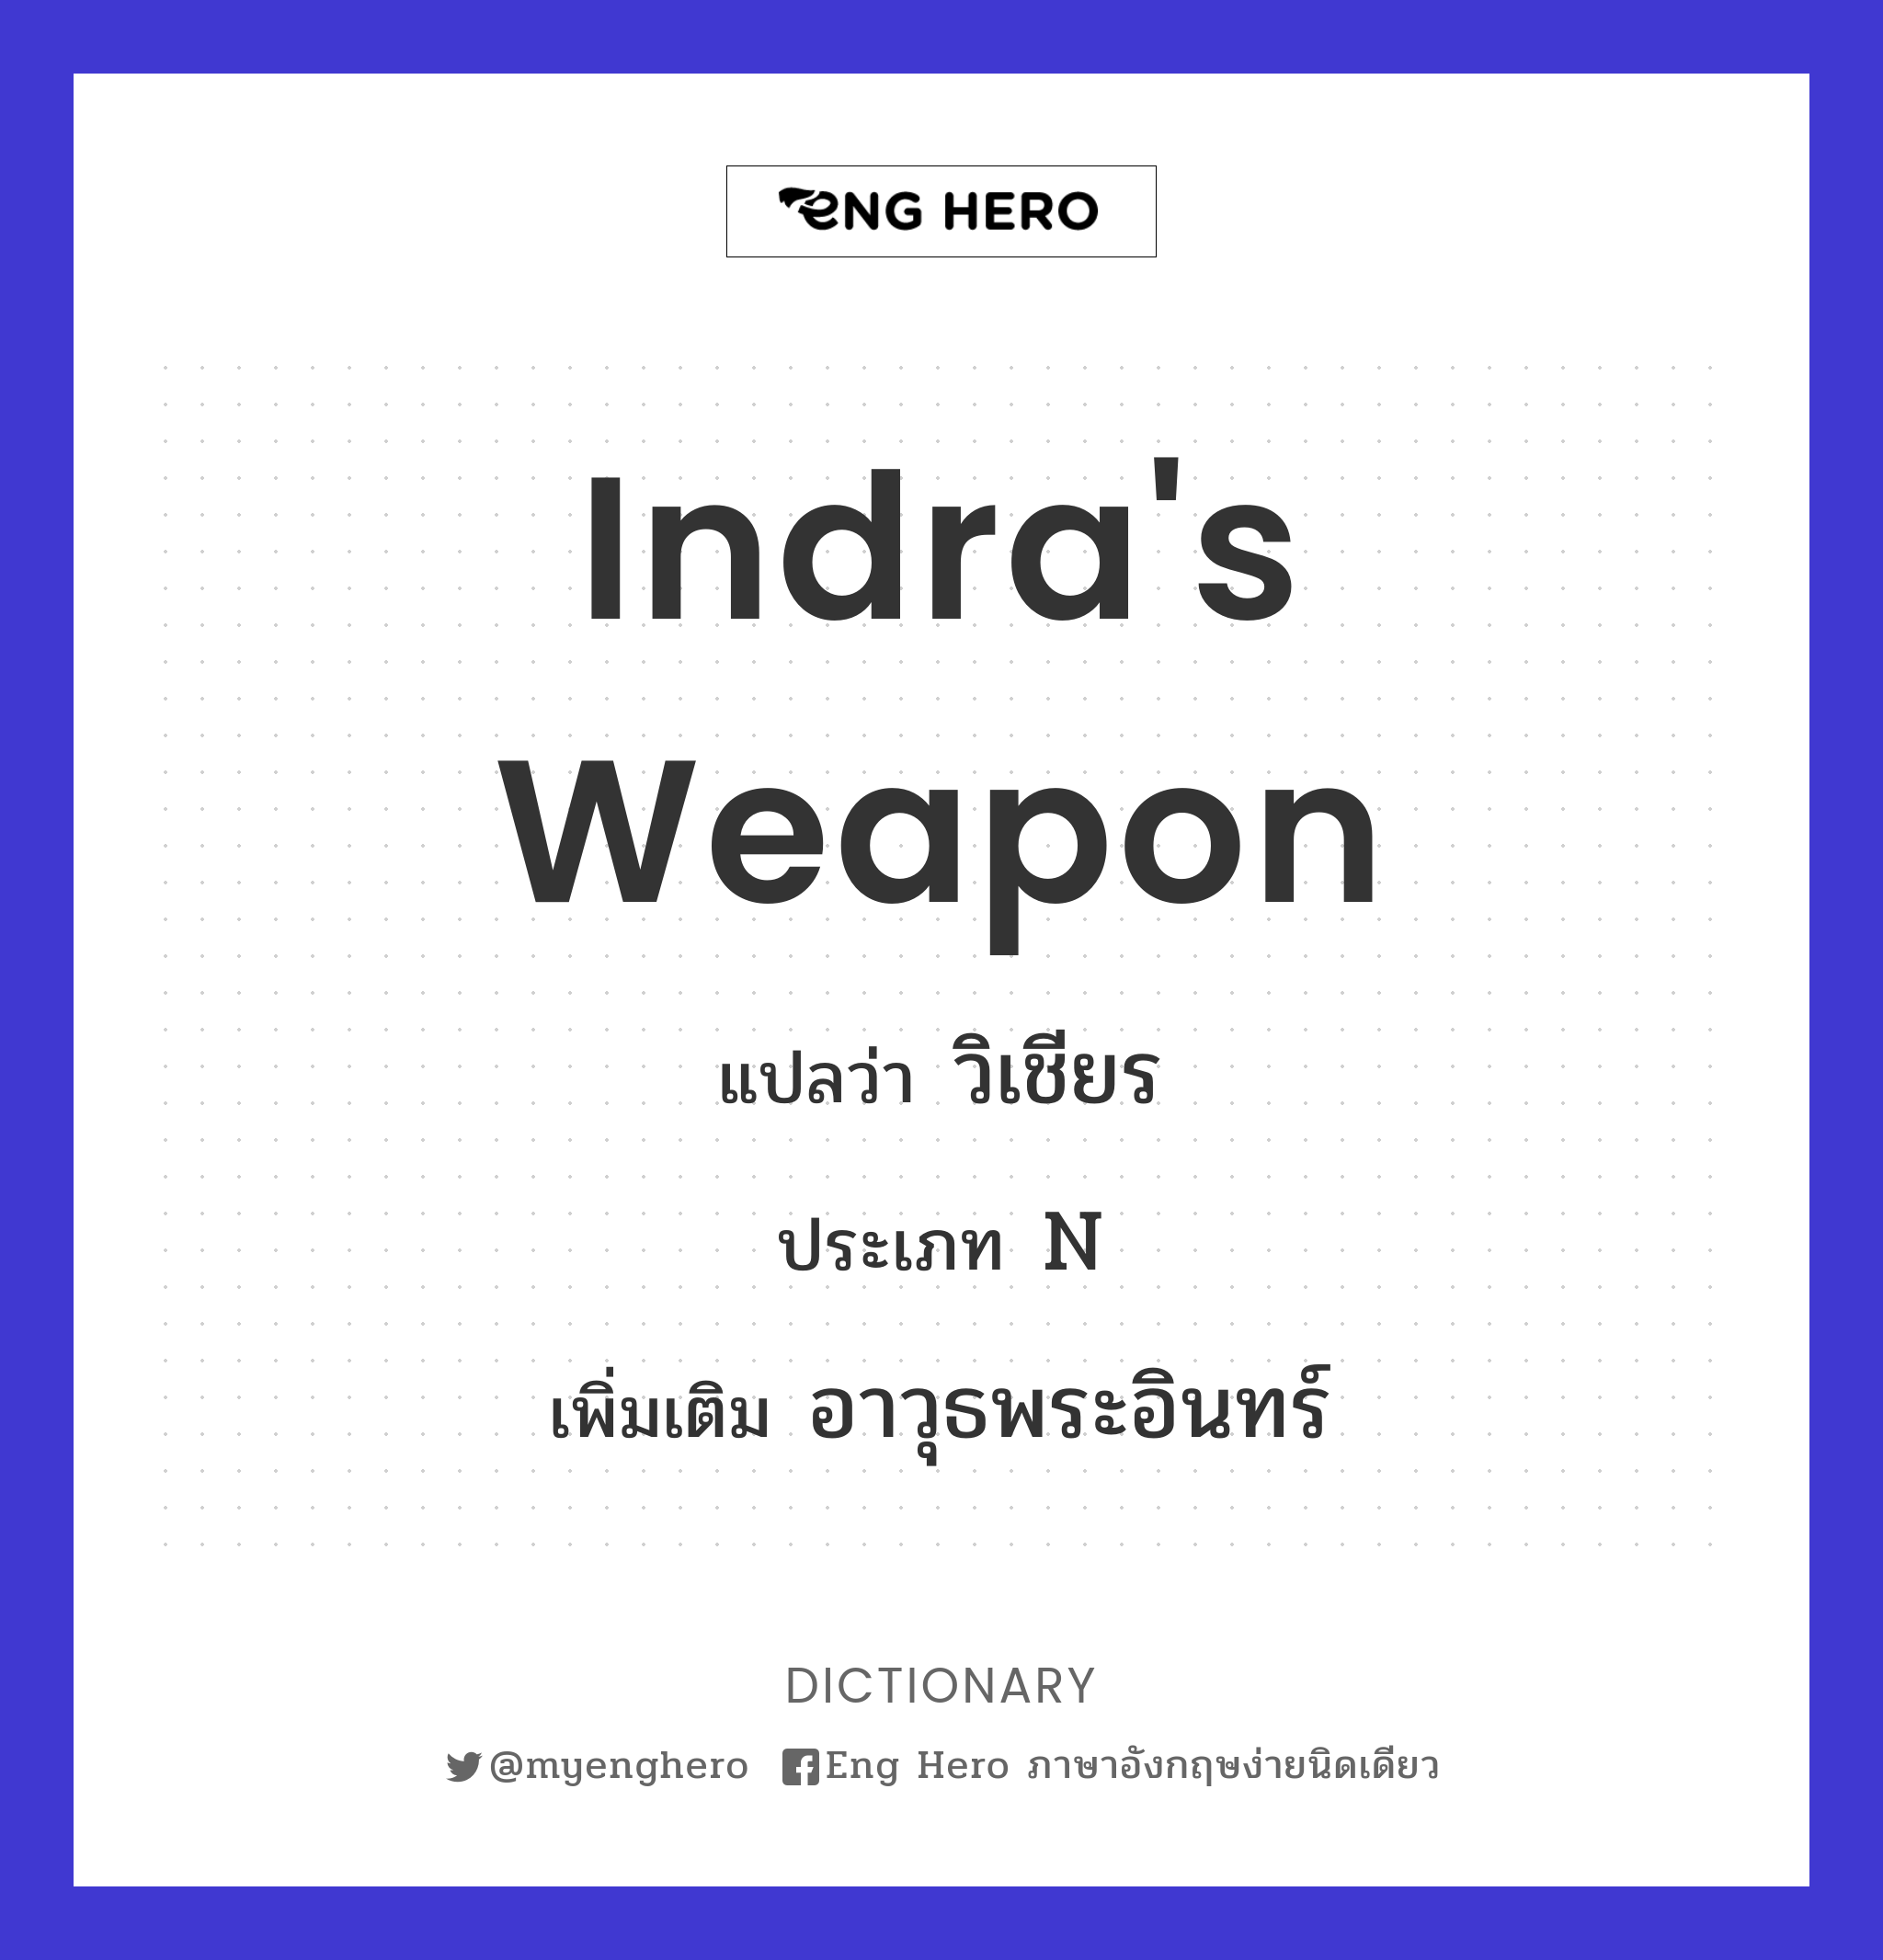 Indra's weapon